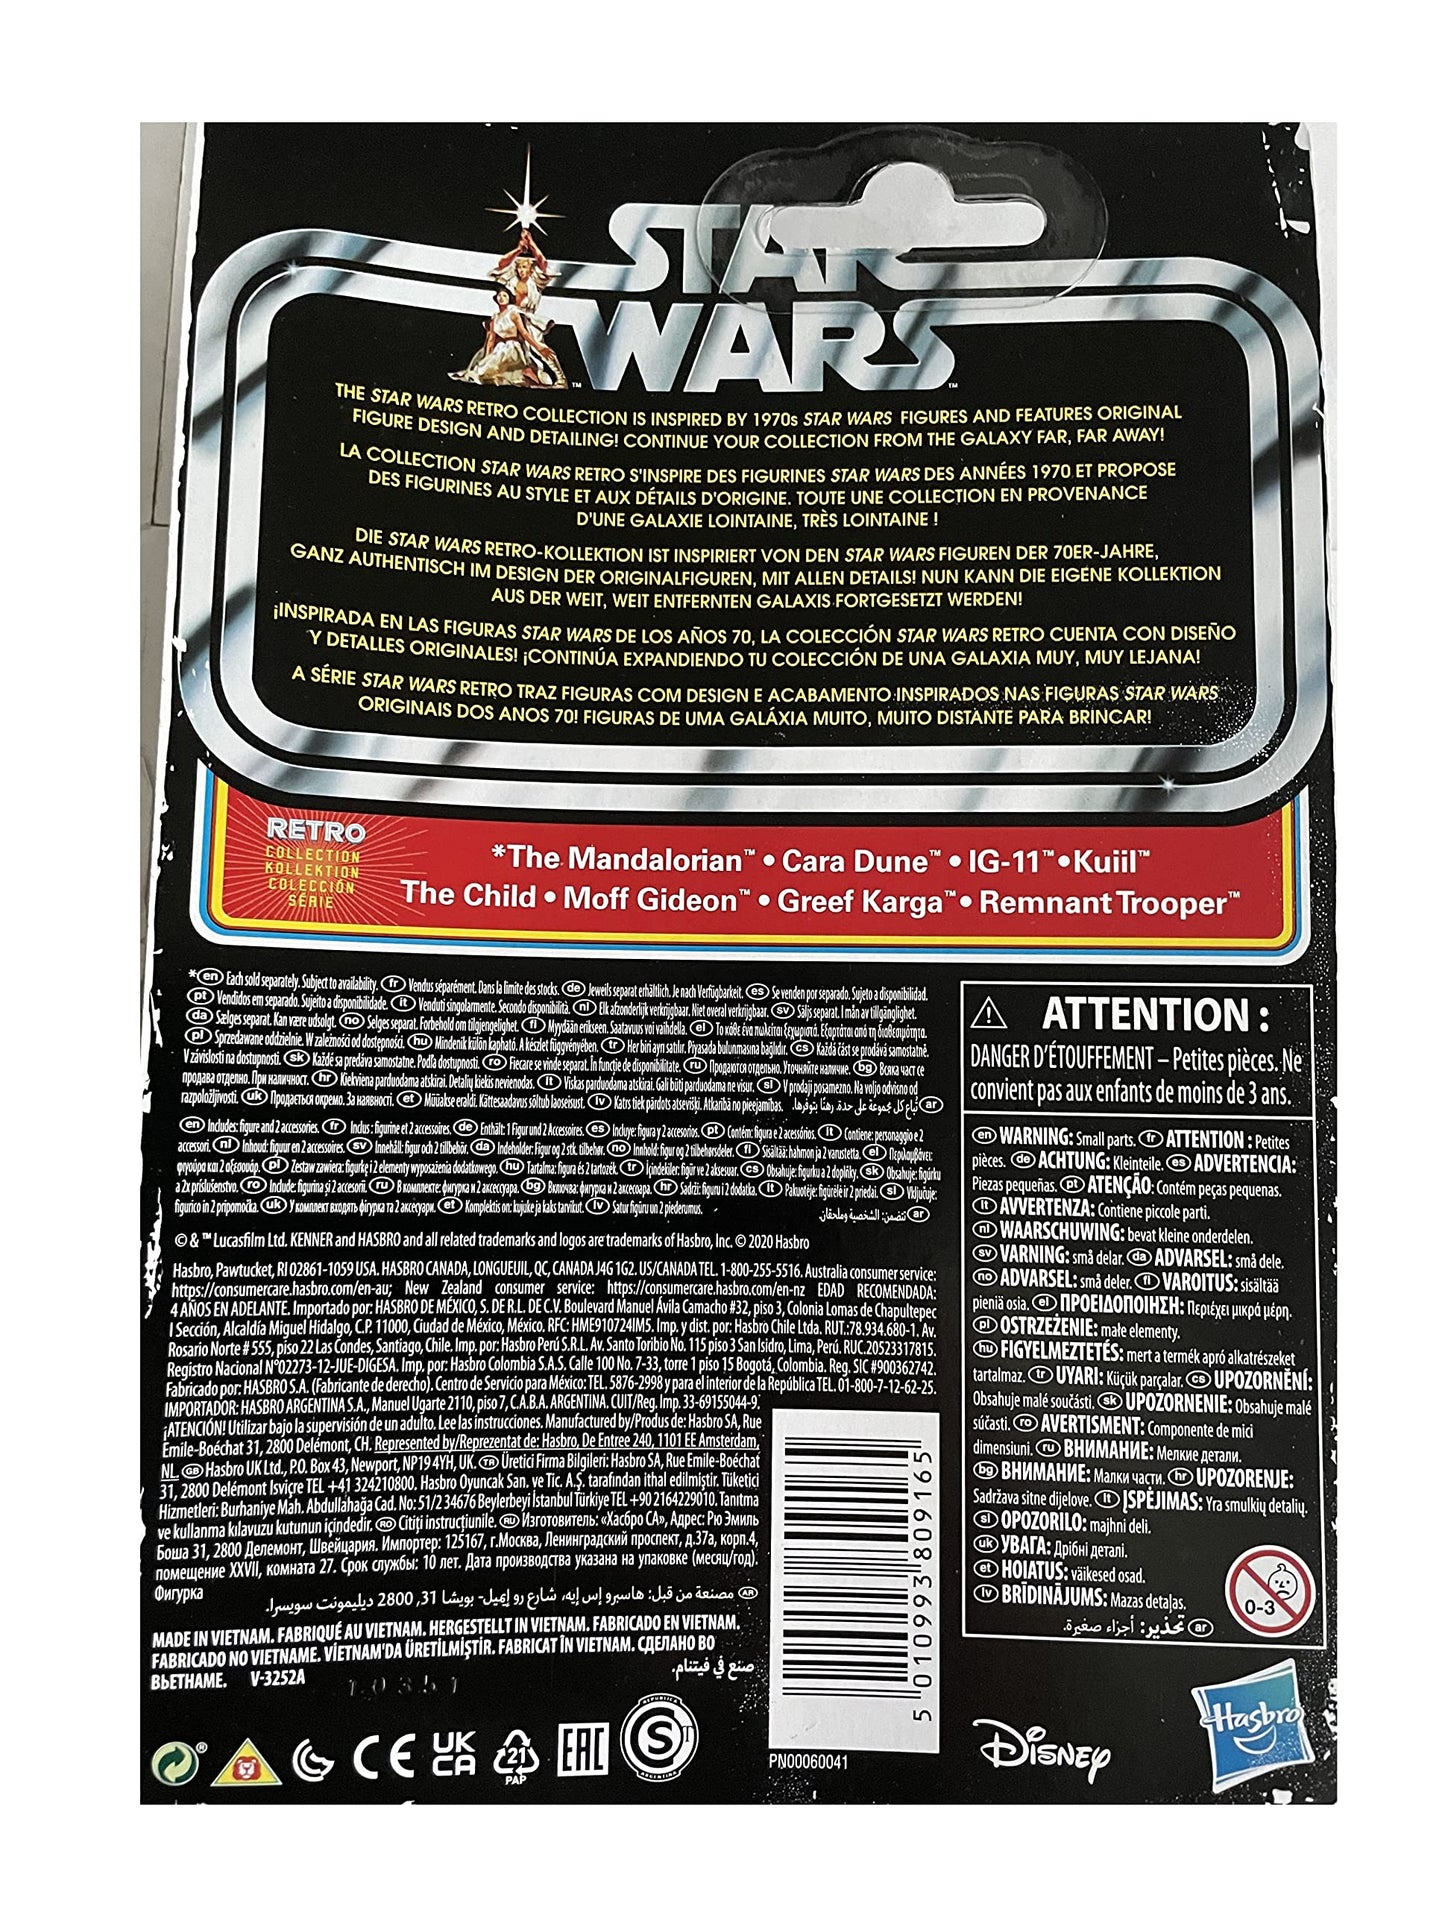 Star Wars Retro Collection - The Mandalorian - Moff Gideon Action Figure With Lightsaber Sword - Brand New Factory Sealed